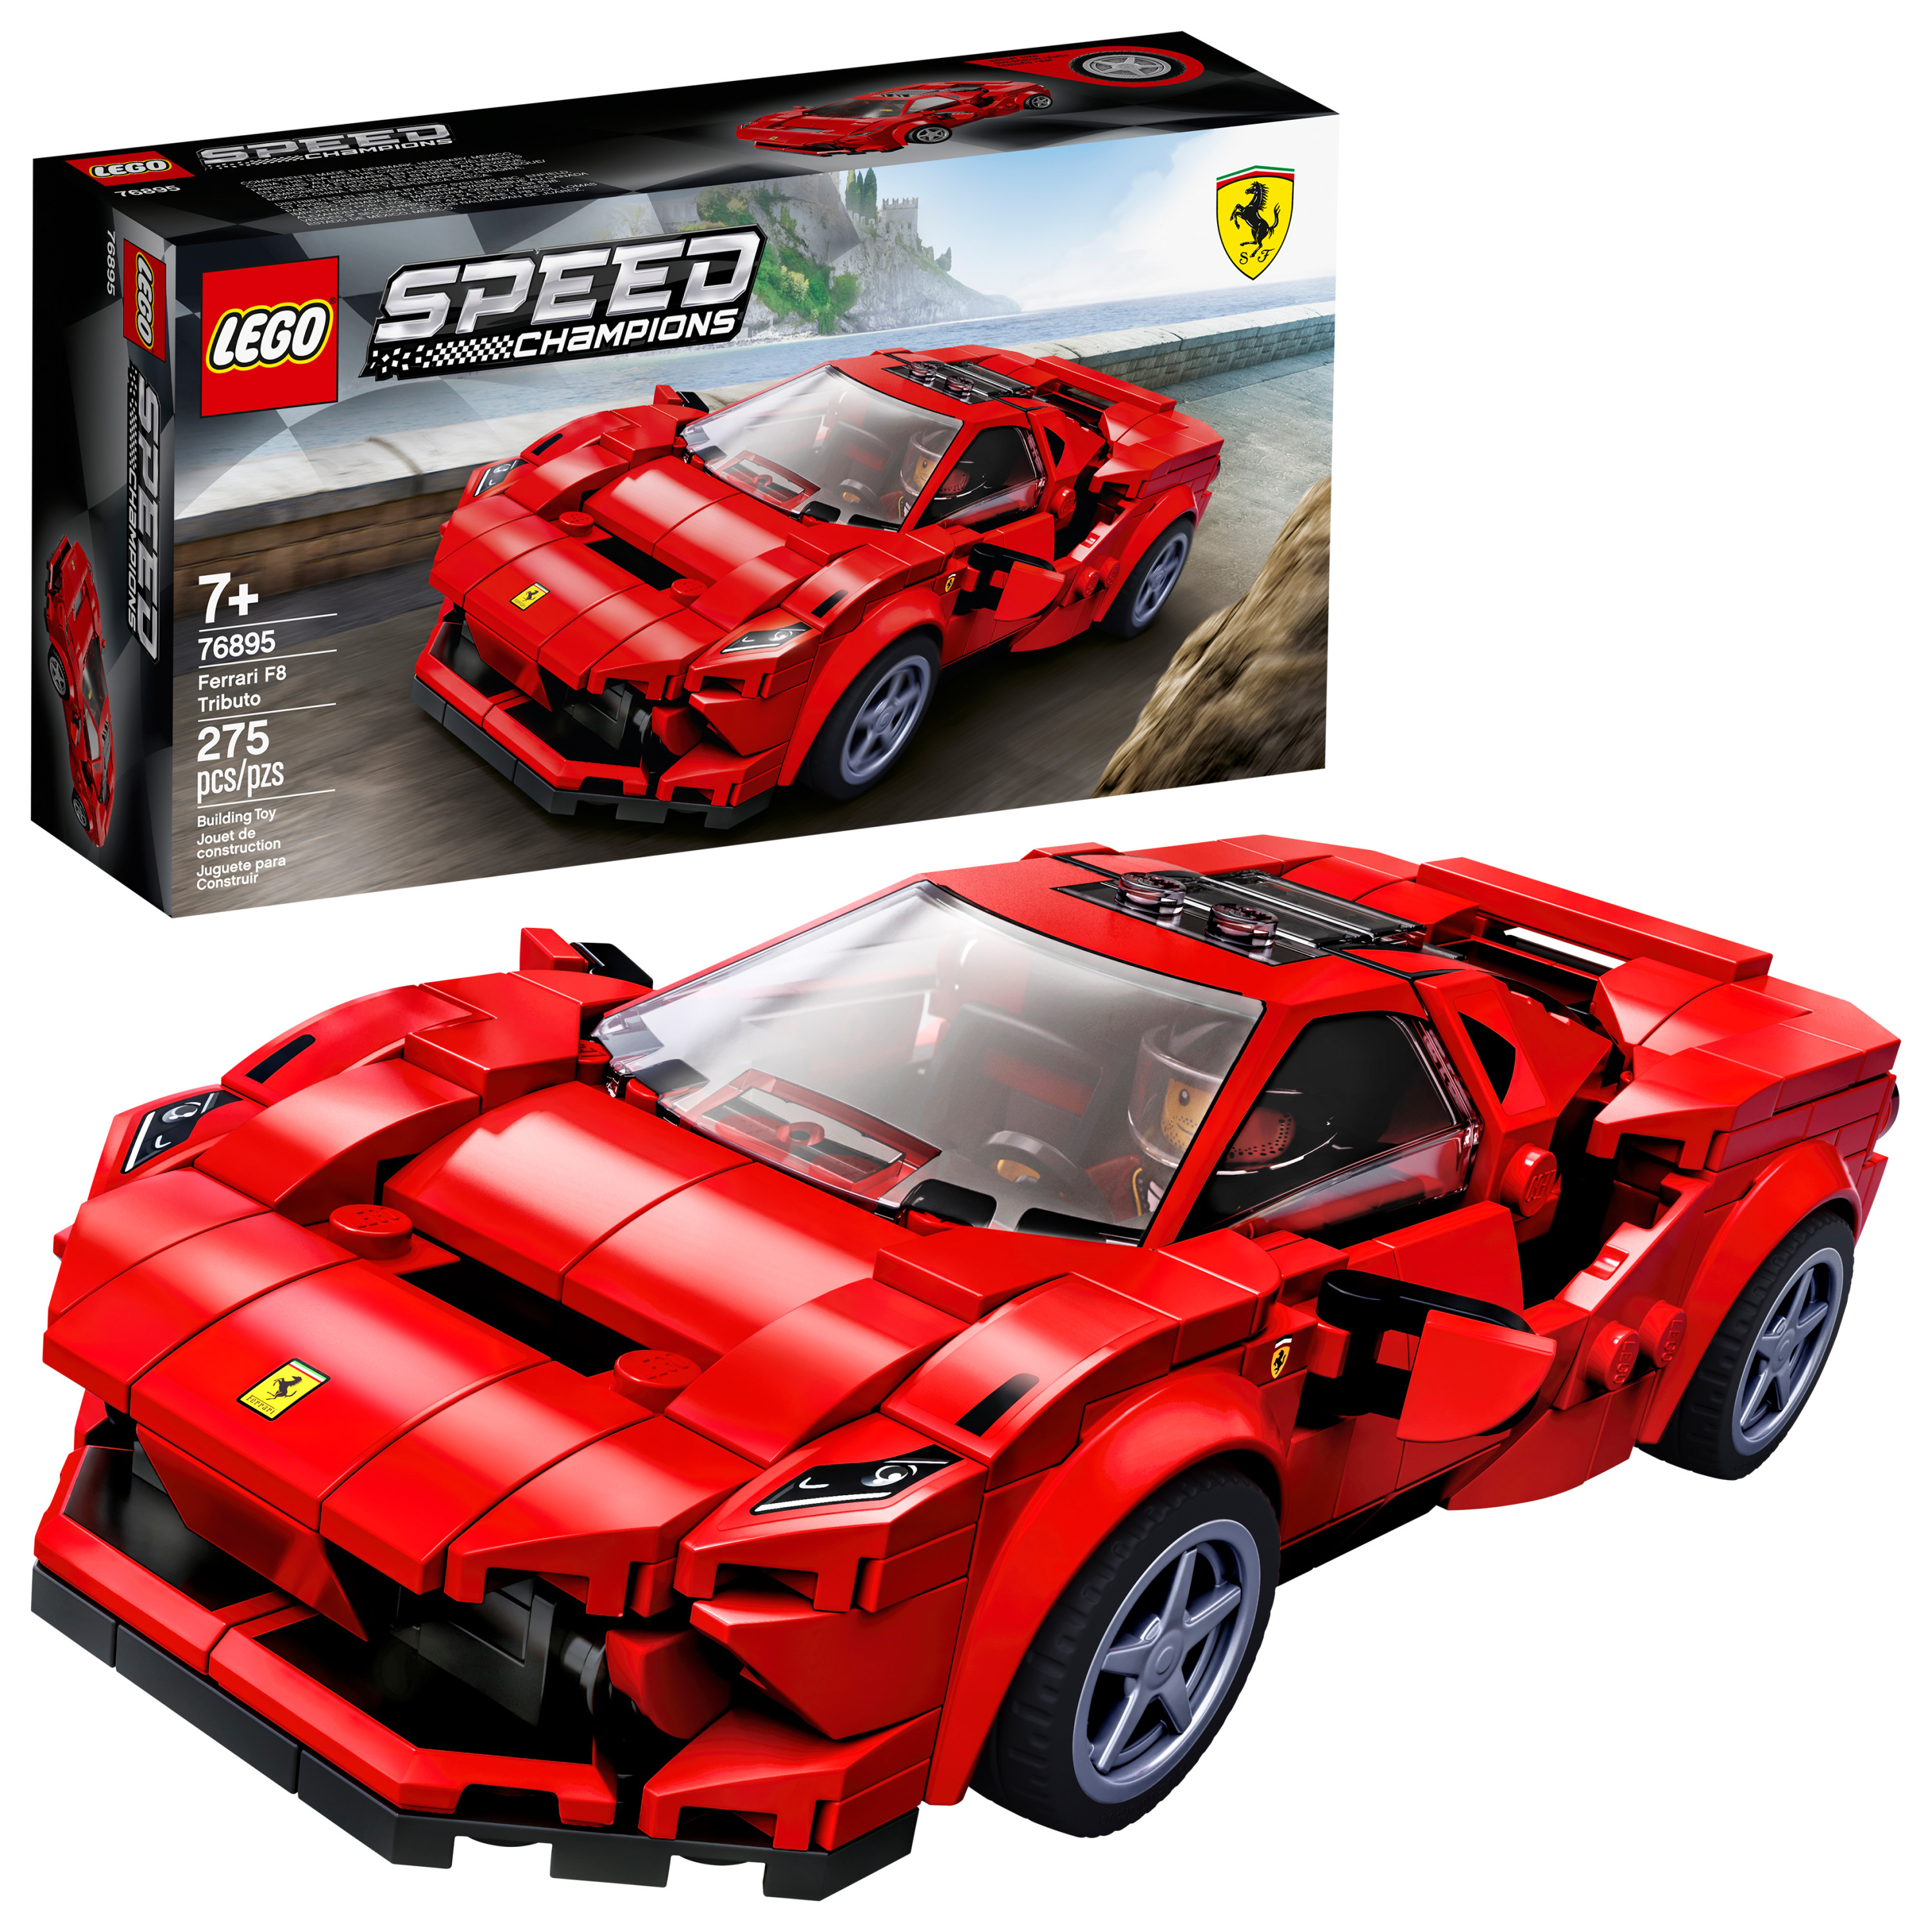 Fun Facts You Didn't Ask For - lego 76895 - Postreking Hor Lego Speed Champions 7 76895 Fara F 275 pcspas